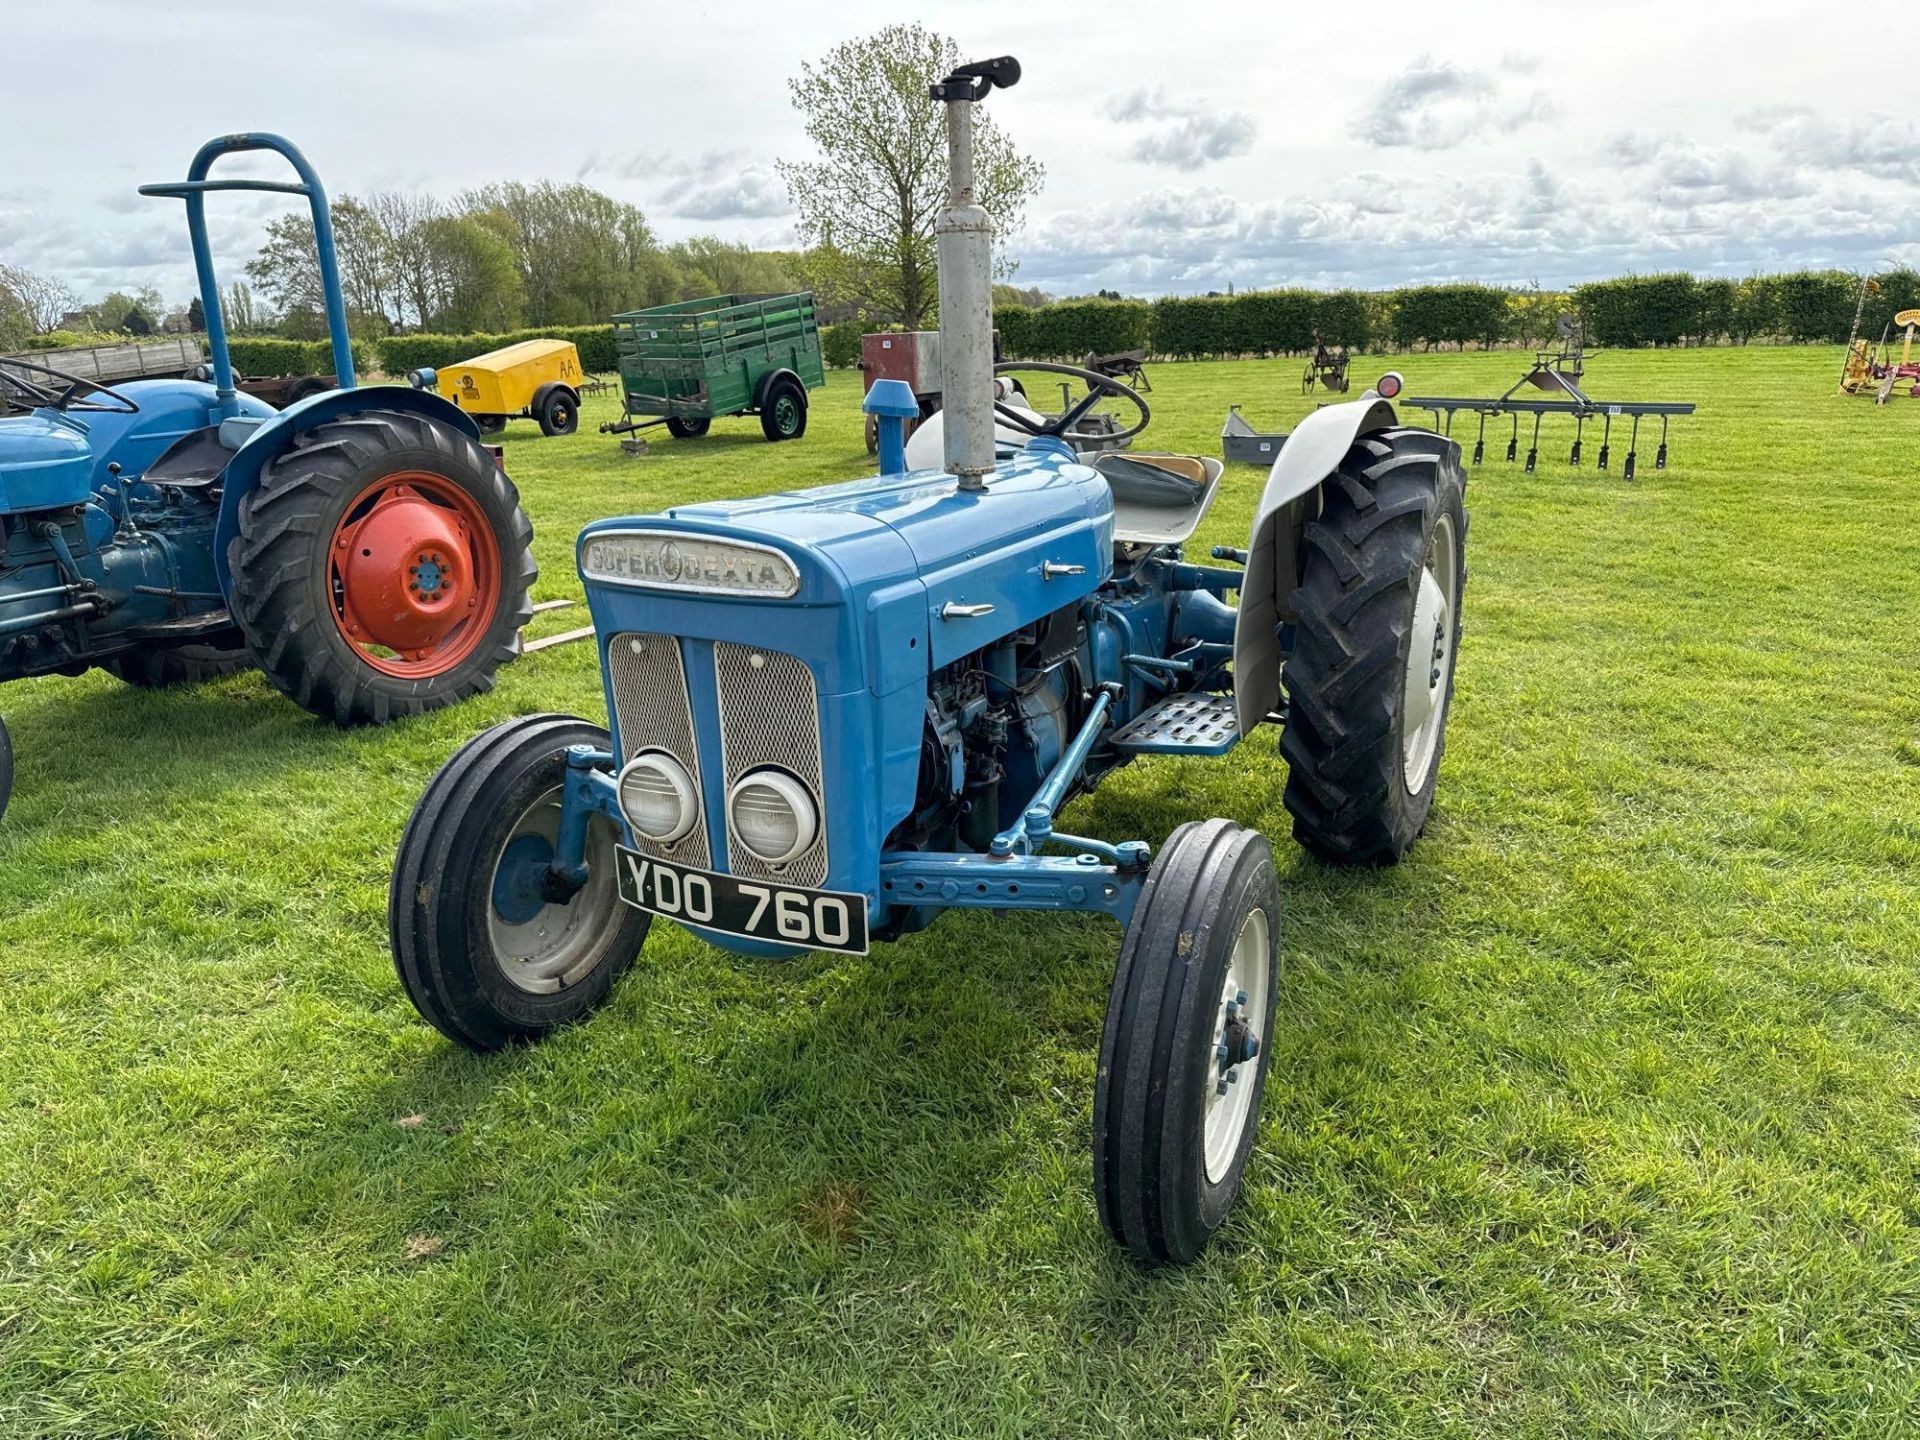 1964 Fordson Super Dexta 2wd diesel tractor with rear linkage, drawbar and PTO on 11.2/28 rear and 6